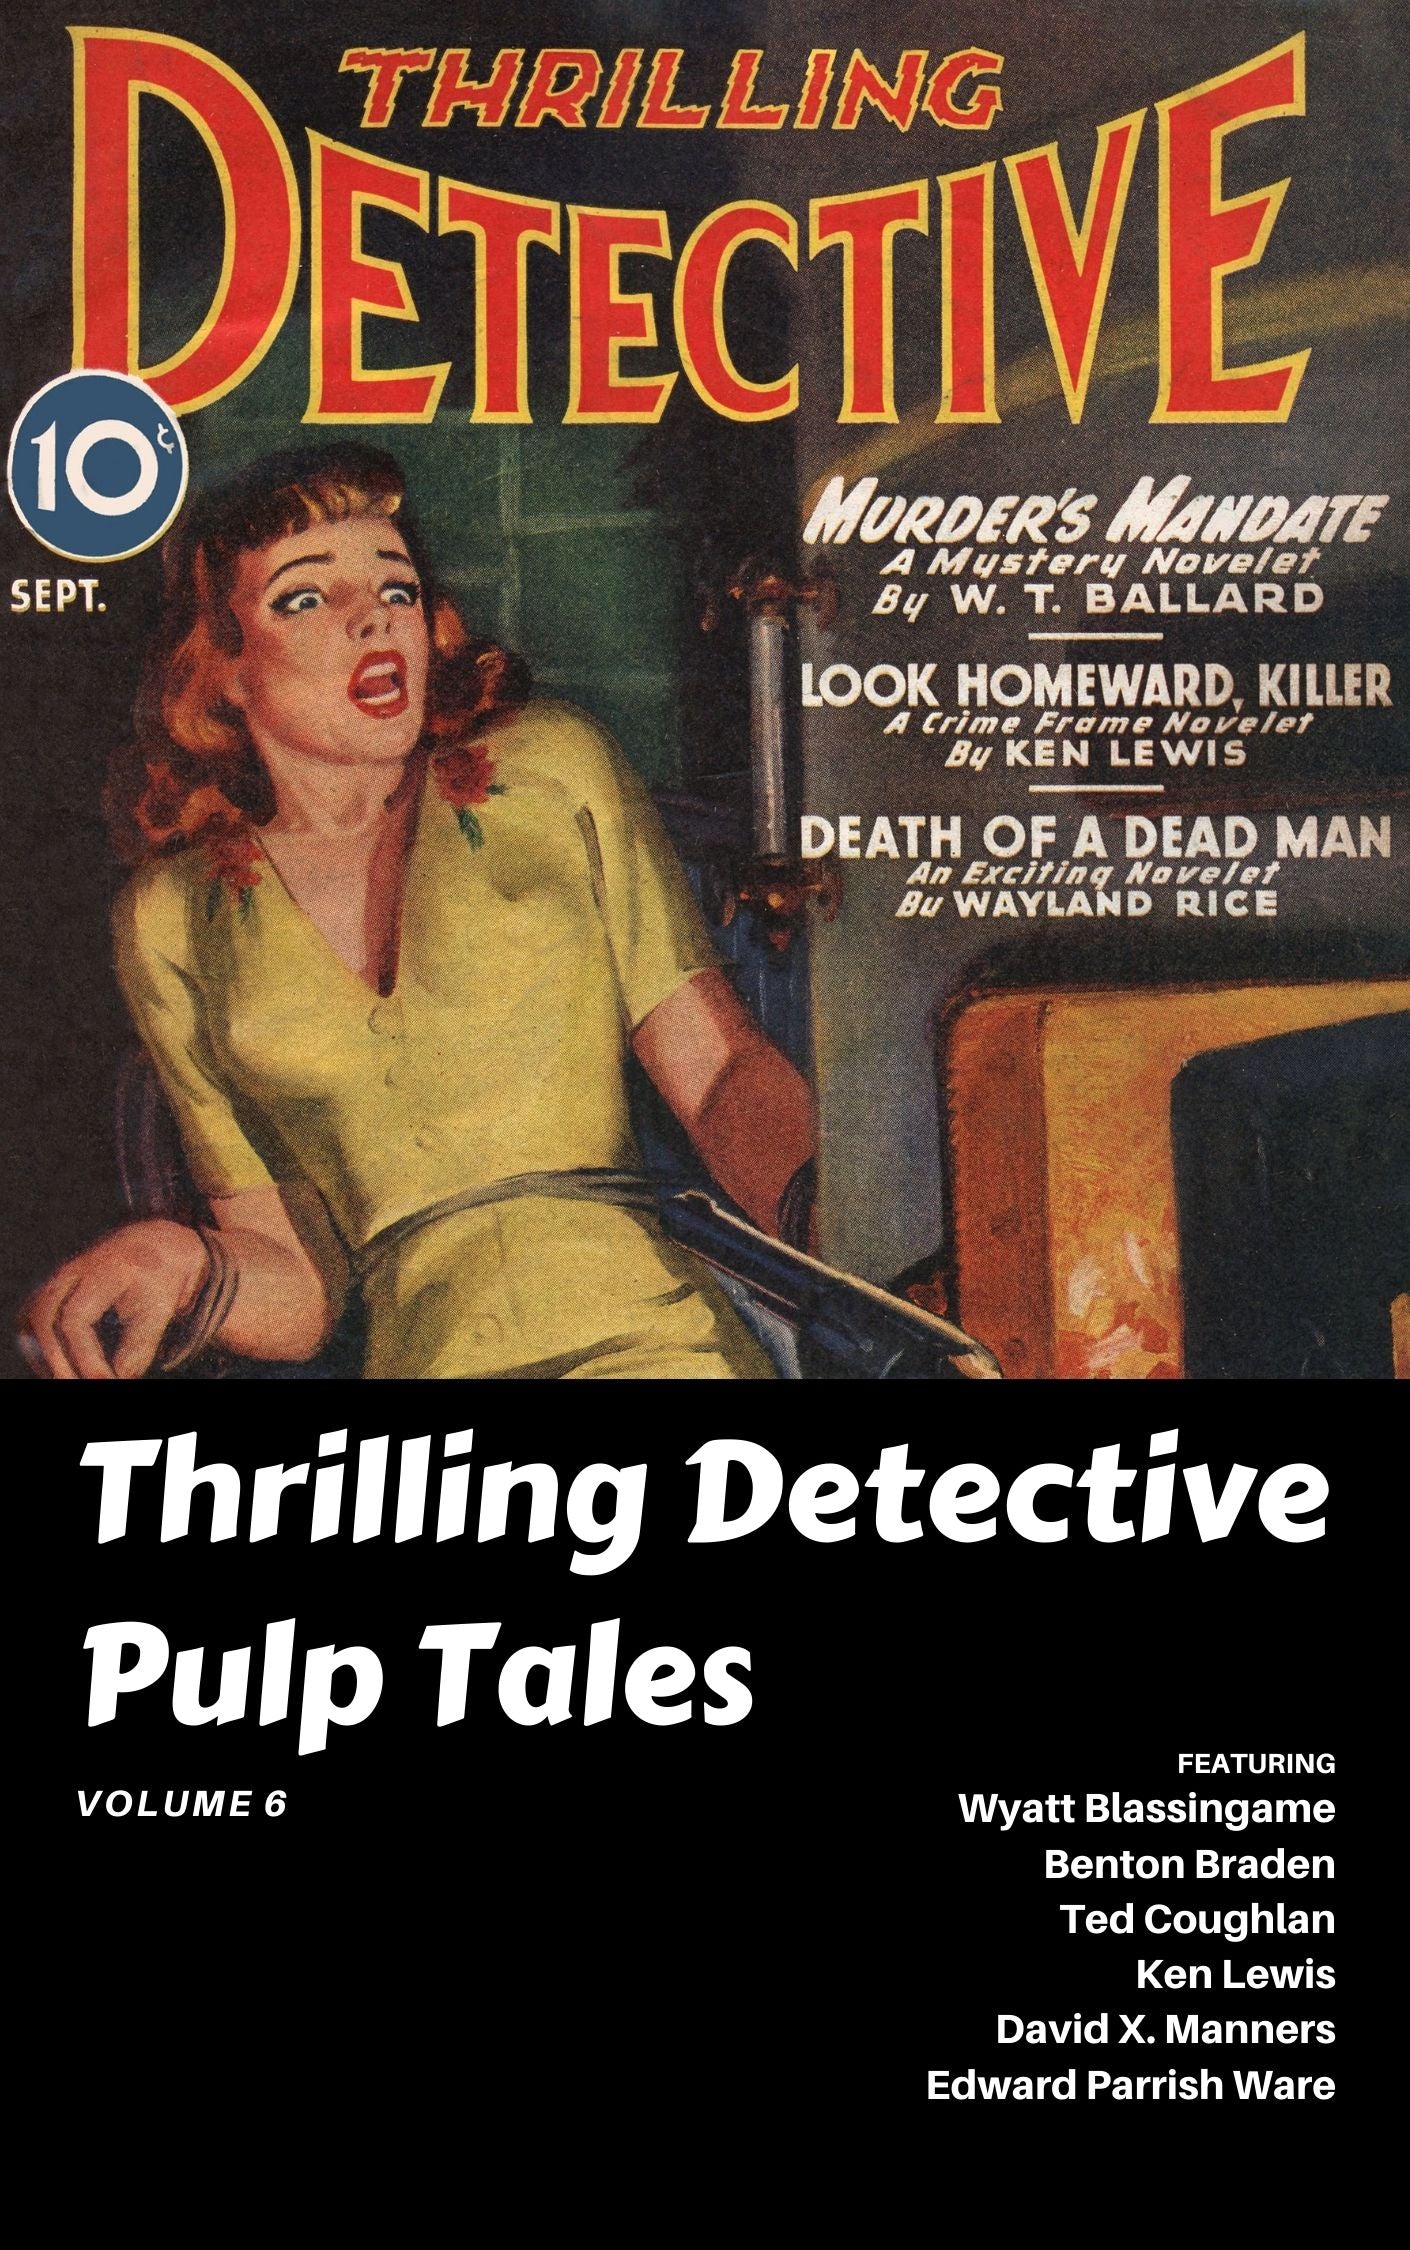 Thrilling Detective Pulp Tales, Volume 6